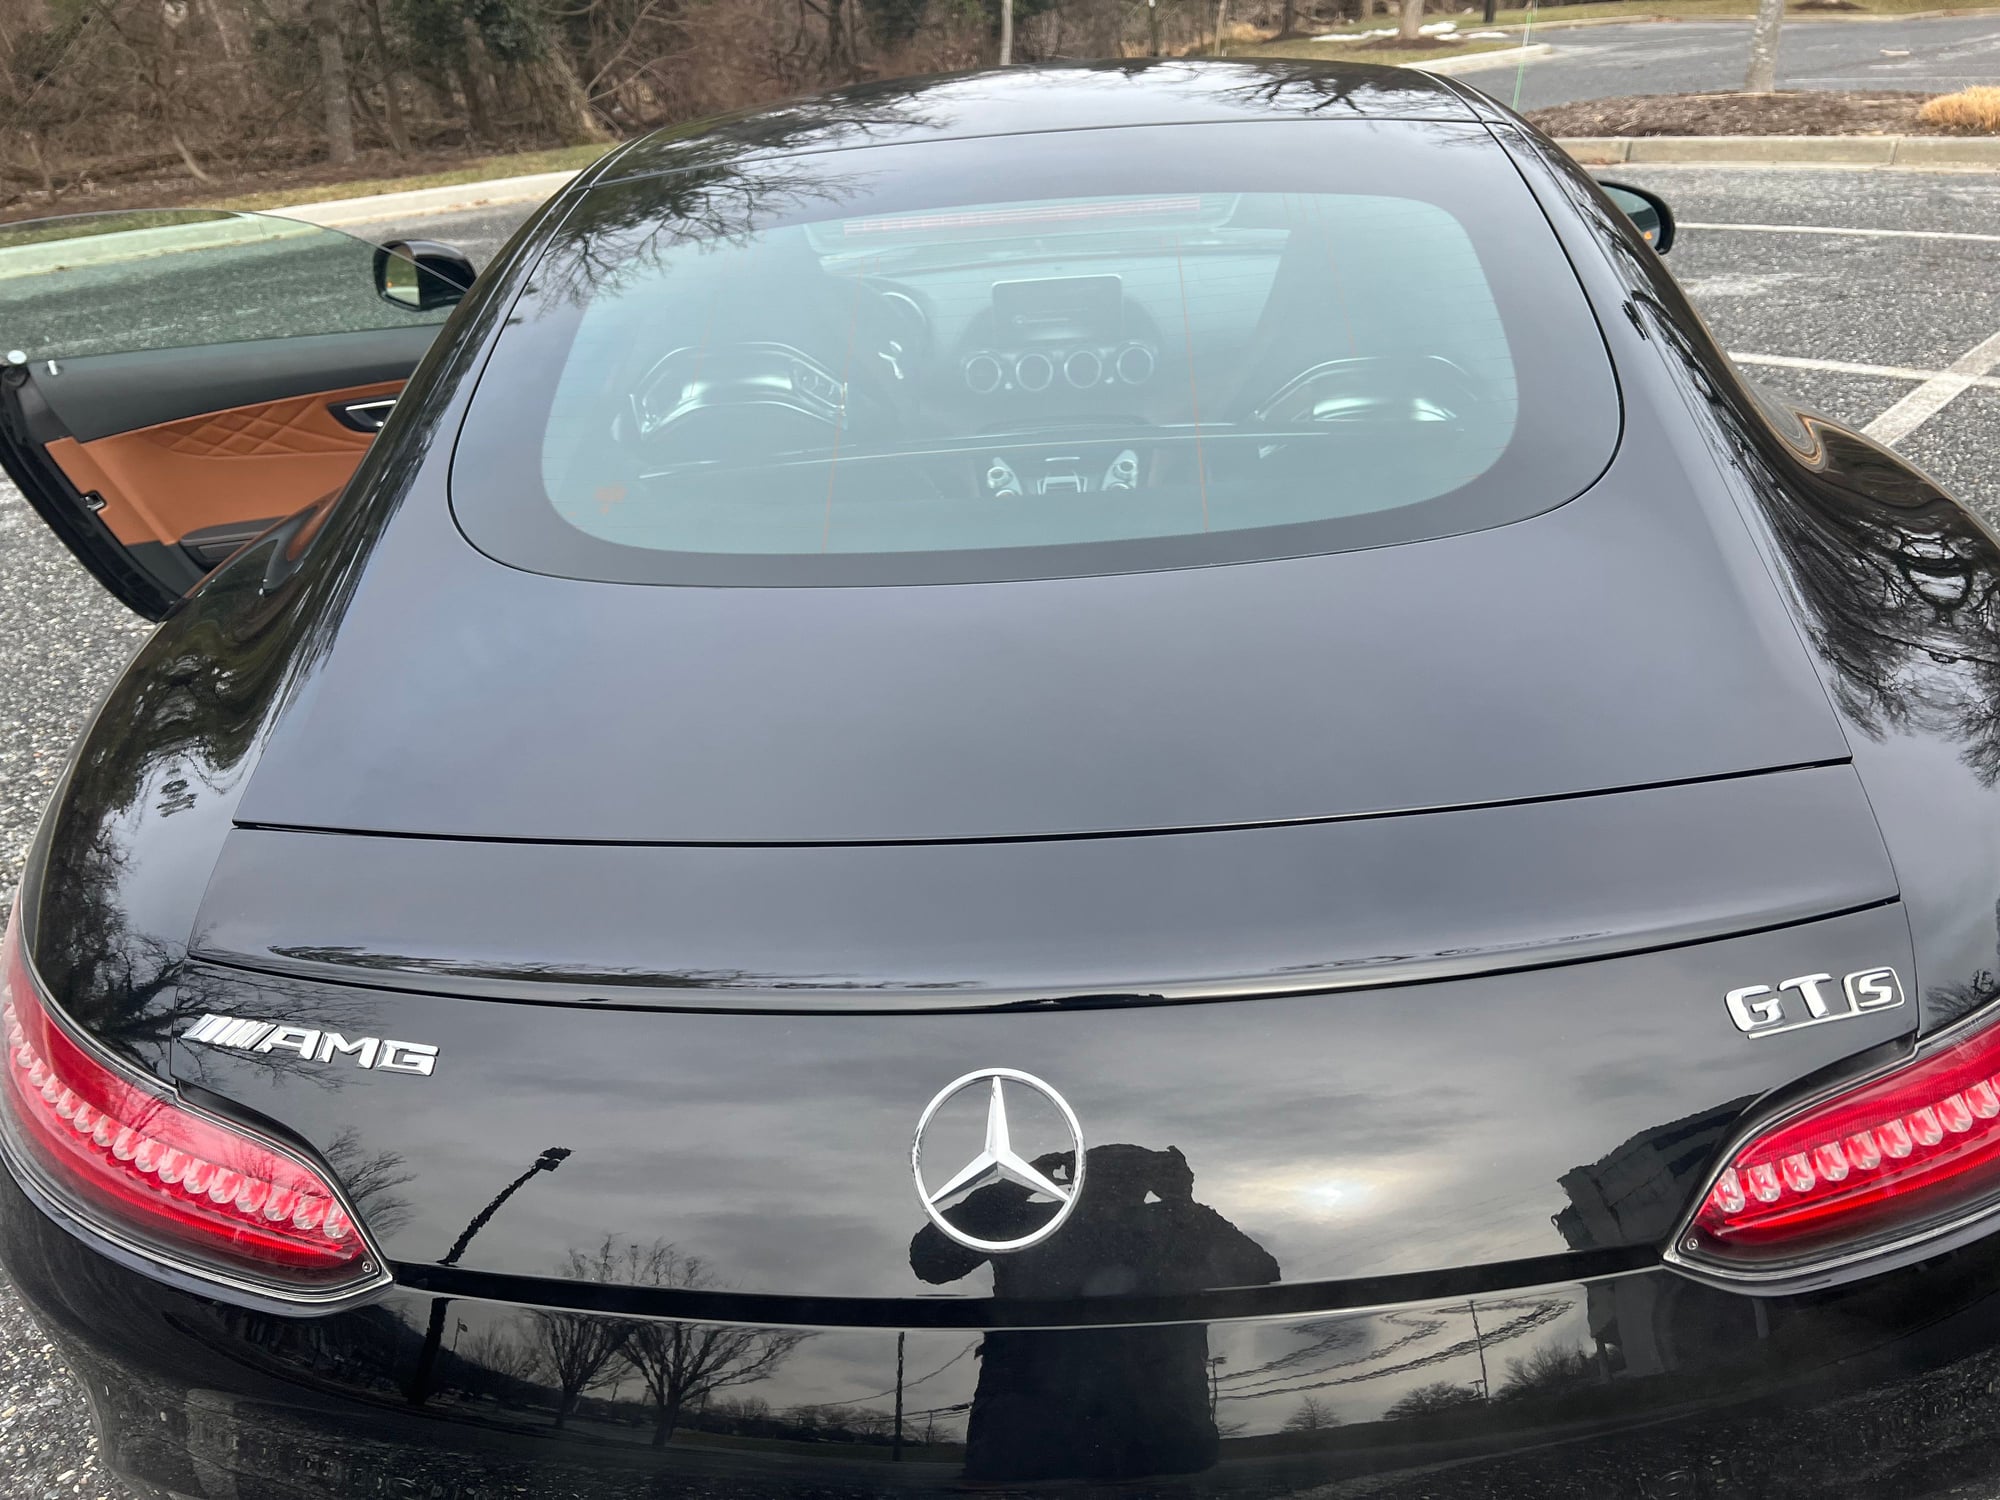 2016 Mercedes-Benz AMG GT S - Show room condition 2016 AMG GTS/ Nice Spec - Used - VIN WDDYJ7JA5GA008640 - 3,600 Miles - 8 cyl - Automatic - Coupe - Black - Lutherville Timonium, MD 21093, United States